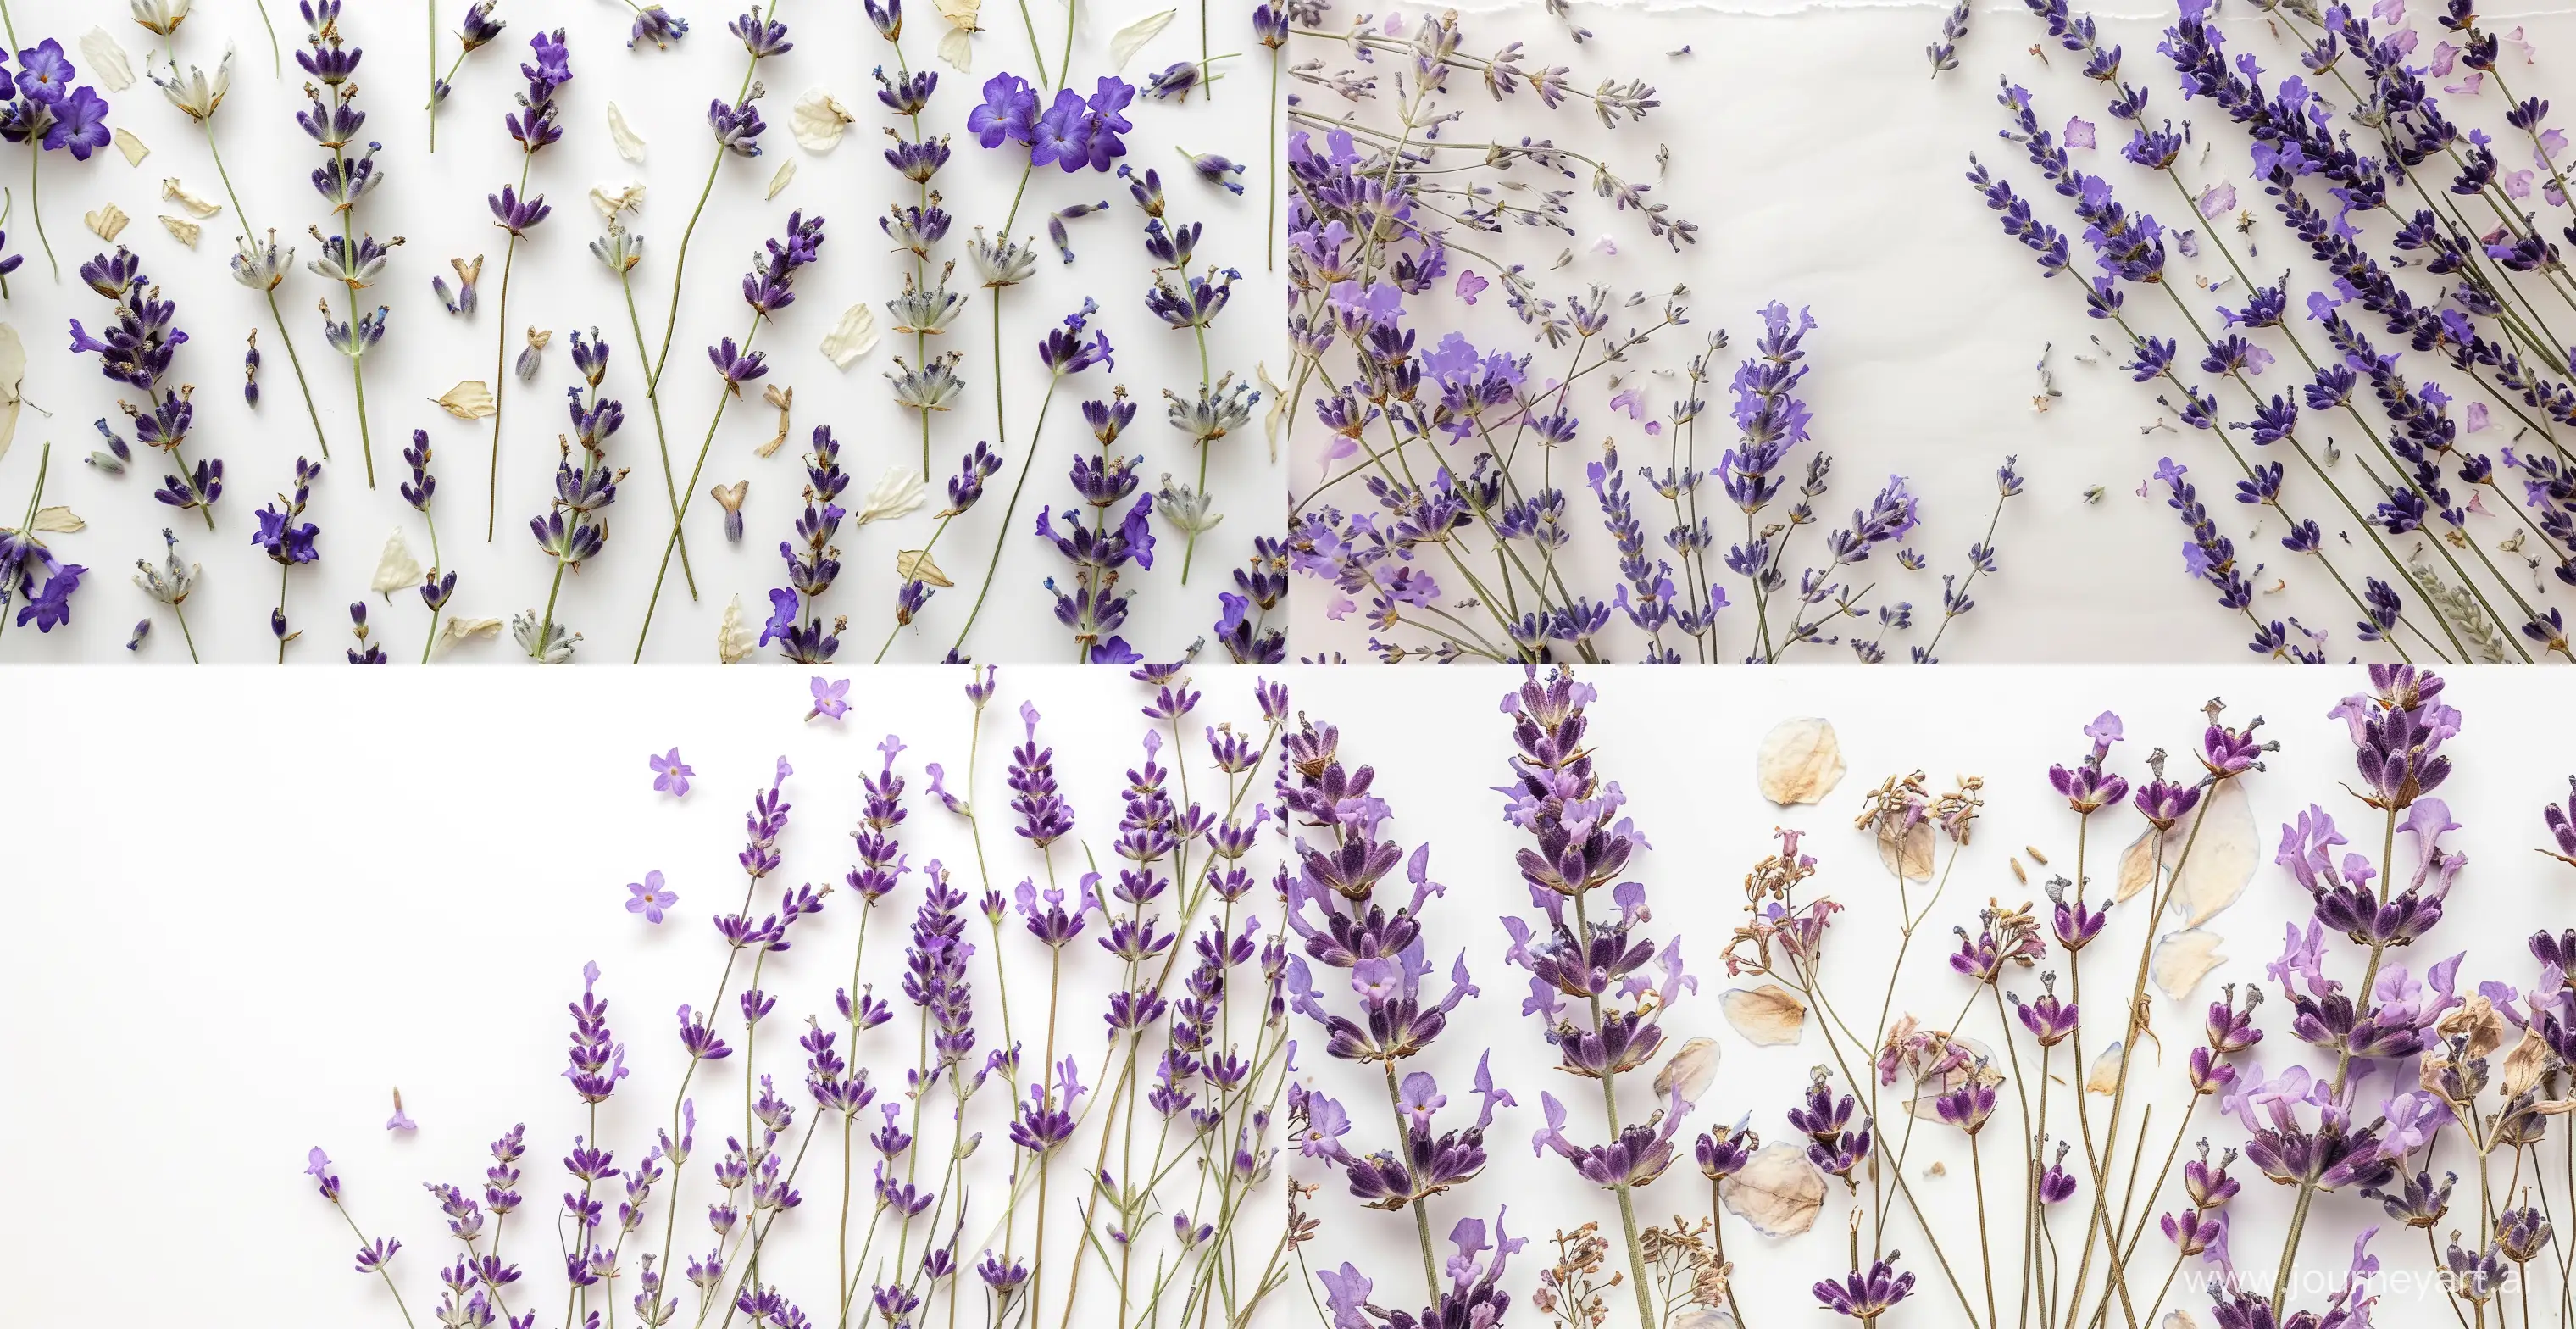 Lavender-Pressed-Dried-Flowers-Watercolor-Art-on-White-Background